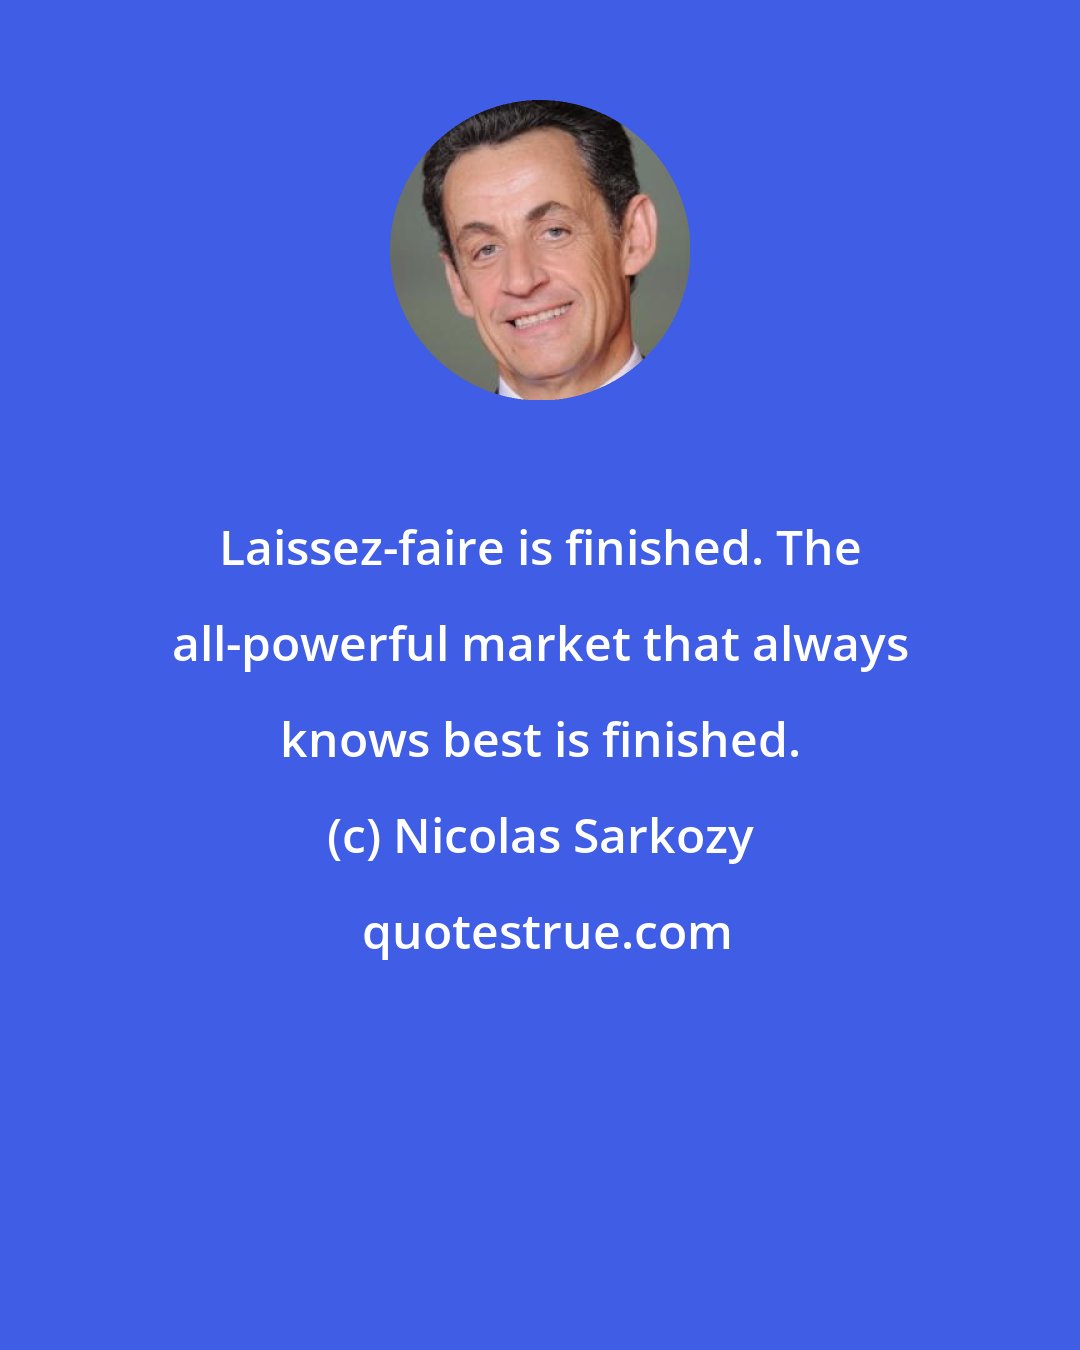 Nicolas Sarkozy: Laissez-faire is finished. The all-powerful market that always knows best is finished.